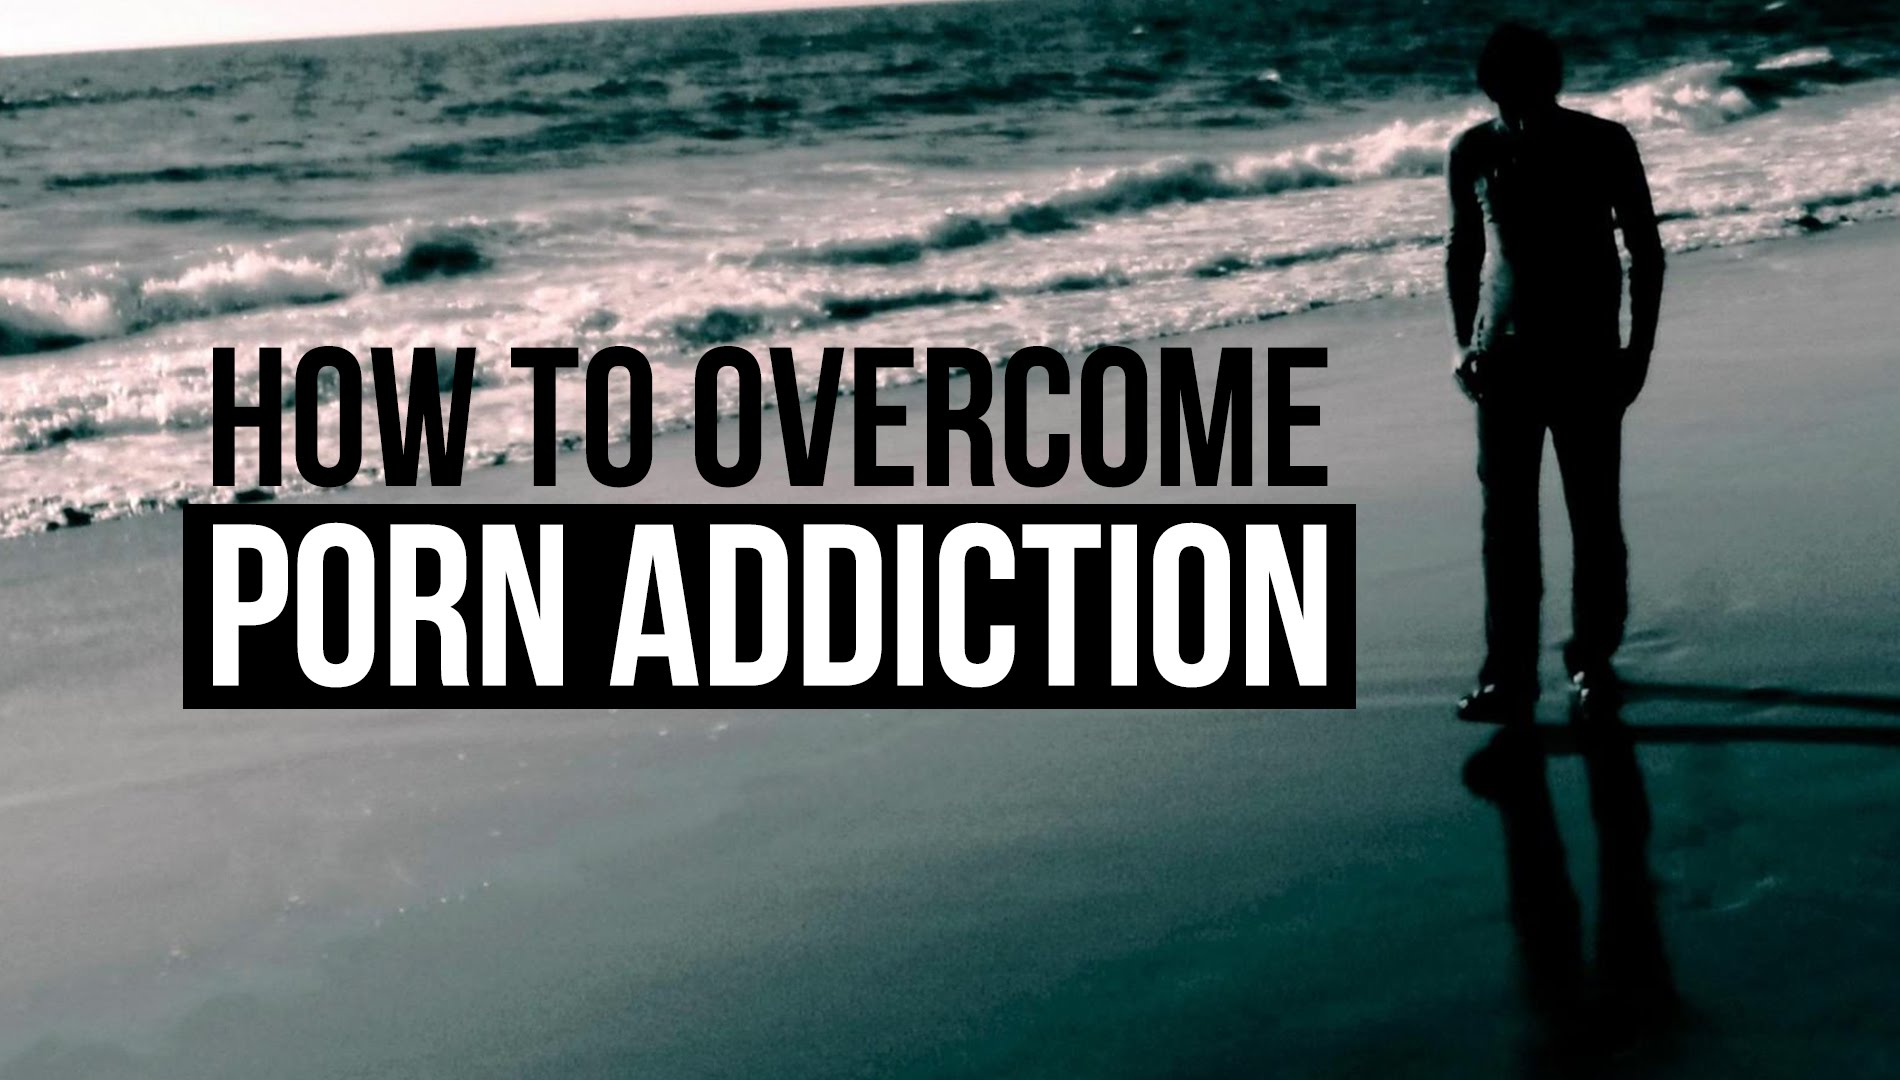 How To Overcome Porn Addiction - CHANGE TODAY!